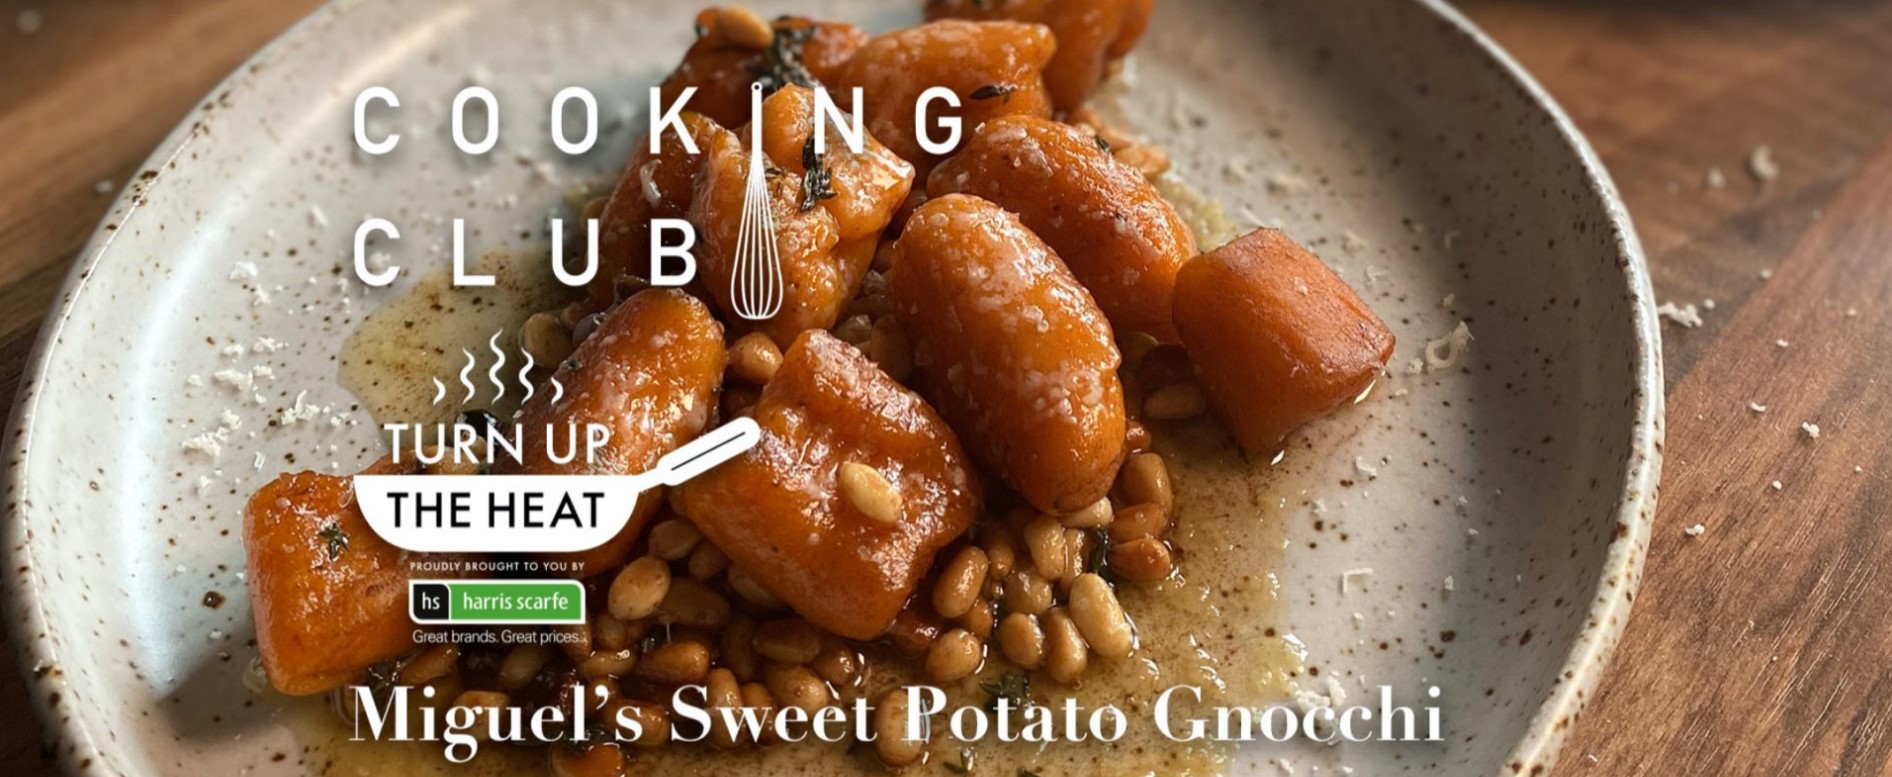 Miguel’s Sweet Potato Gnocchi in a Burnt Butter Sauce